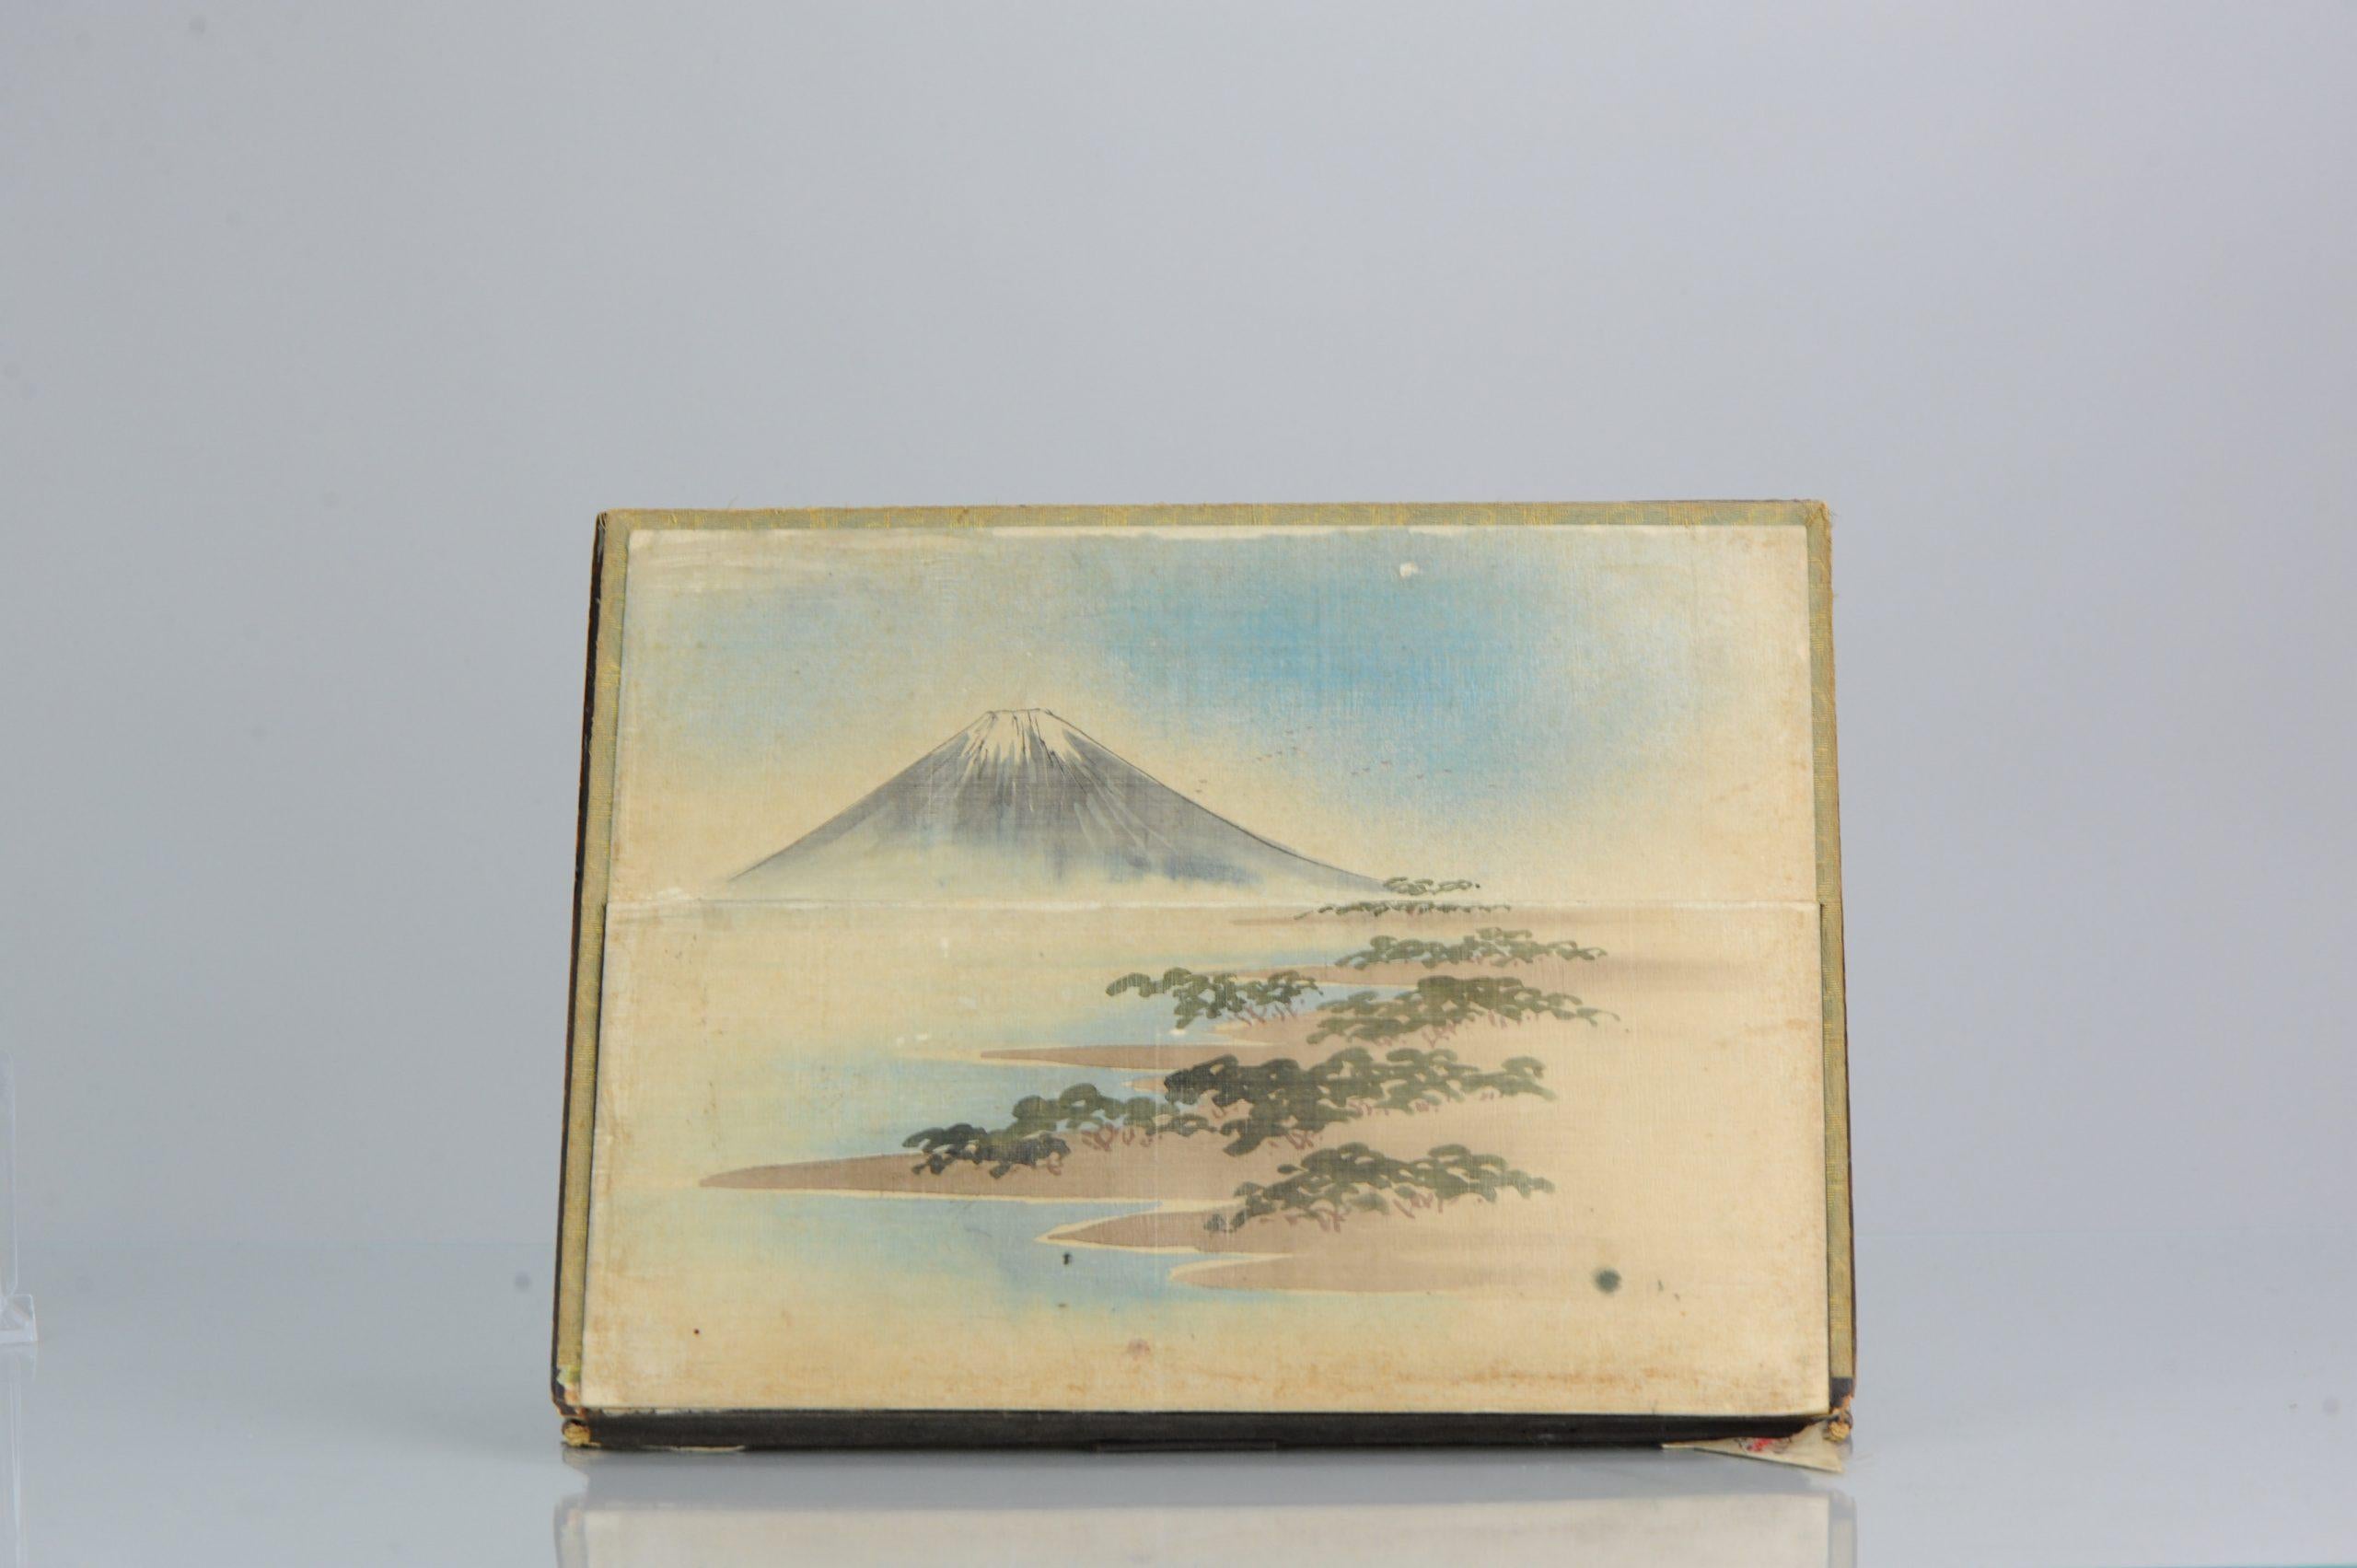 Antique Student Writing Map Japanese Lacquer Ware Writing Meiji Period Japan

Some damage

Additional information:
Material: Lacquer 
Region of Origin: Japan
Period: 19th century
Original/Reproduction: Original
Condition: Overall Condition In used